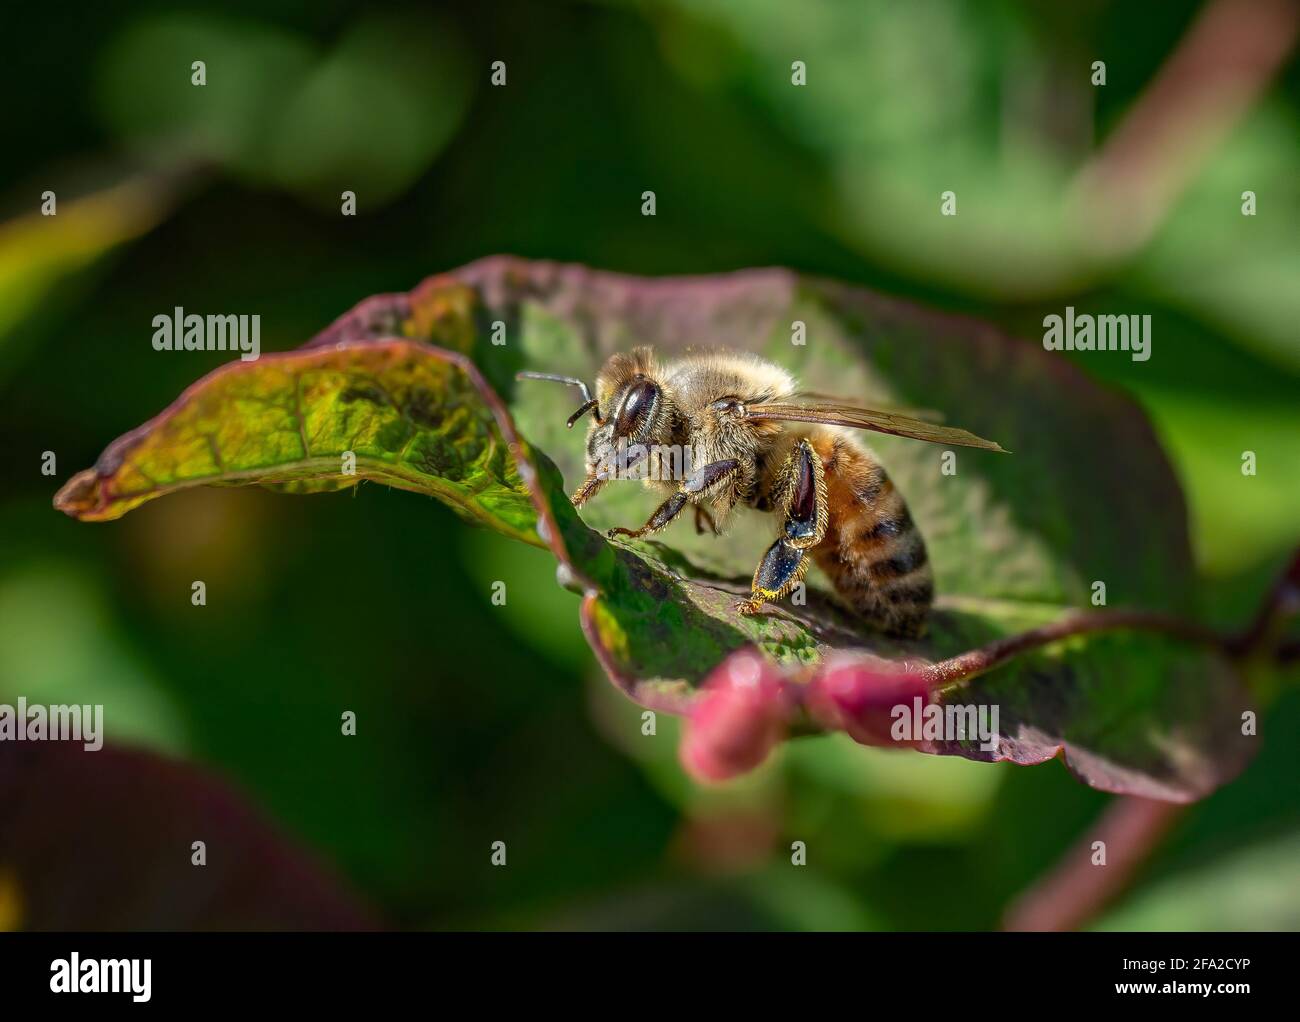 European Honeybee grooming itself from pollenbuild up on a beautiful vibrant green leaf Stock Photo